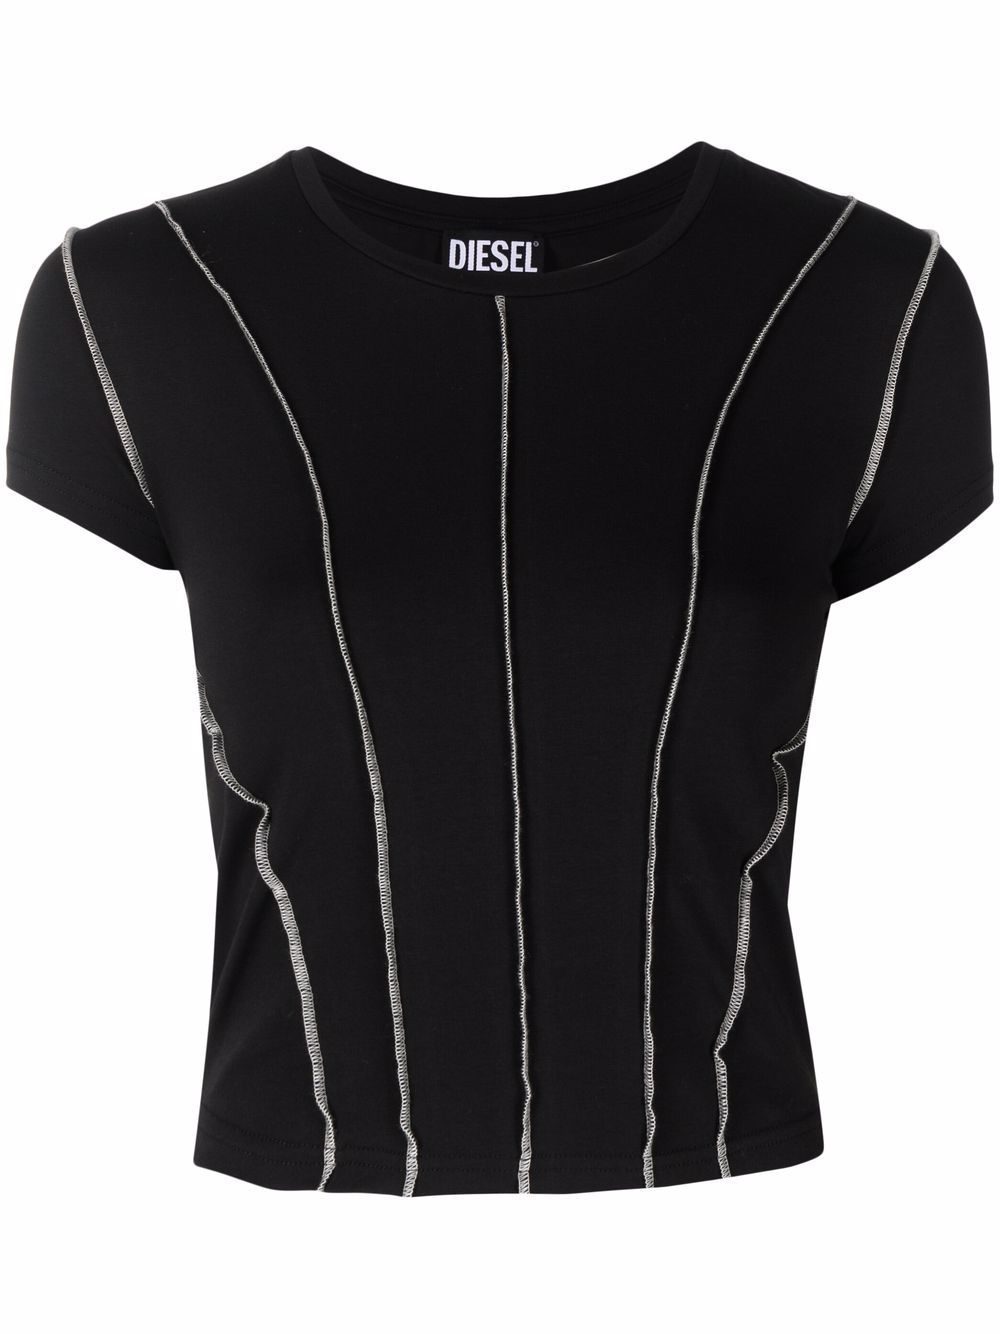 Image 1 of Diesel piped-trim detail T-shirt